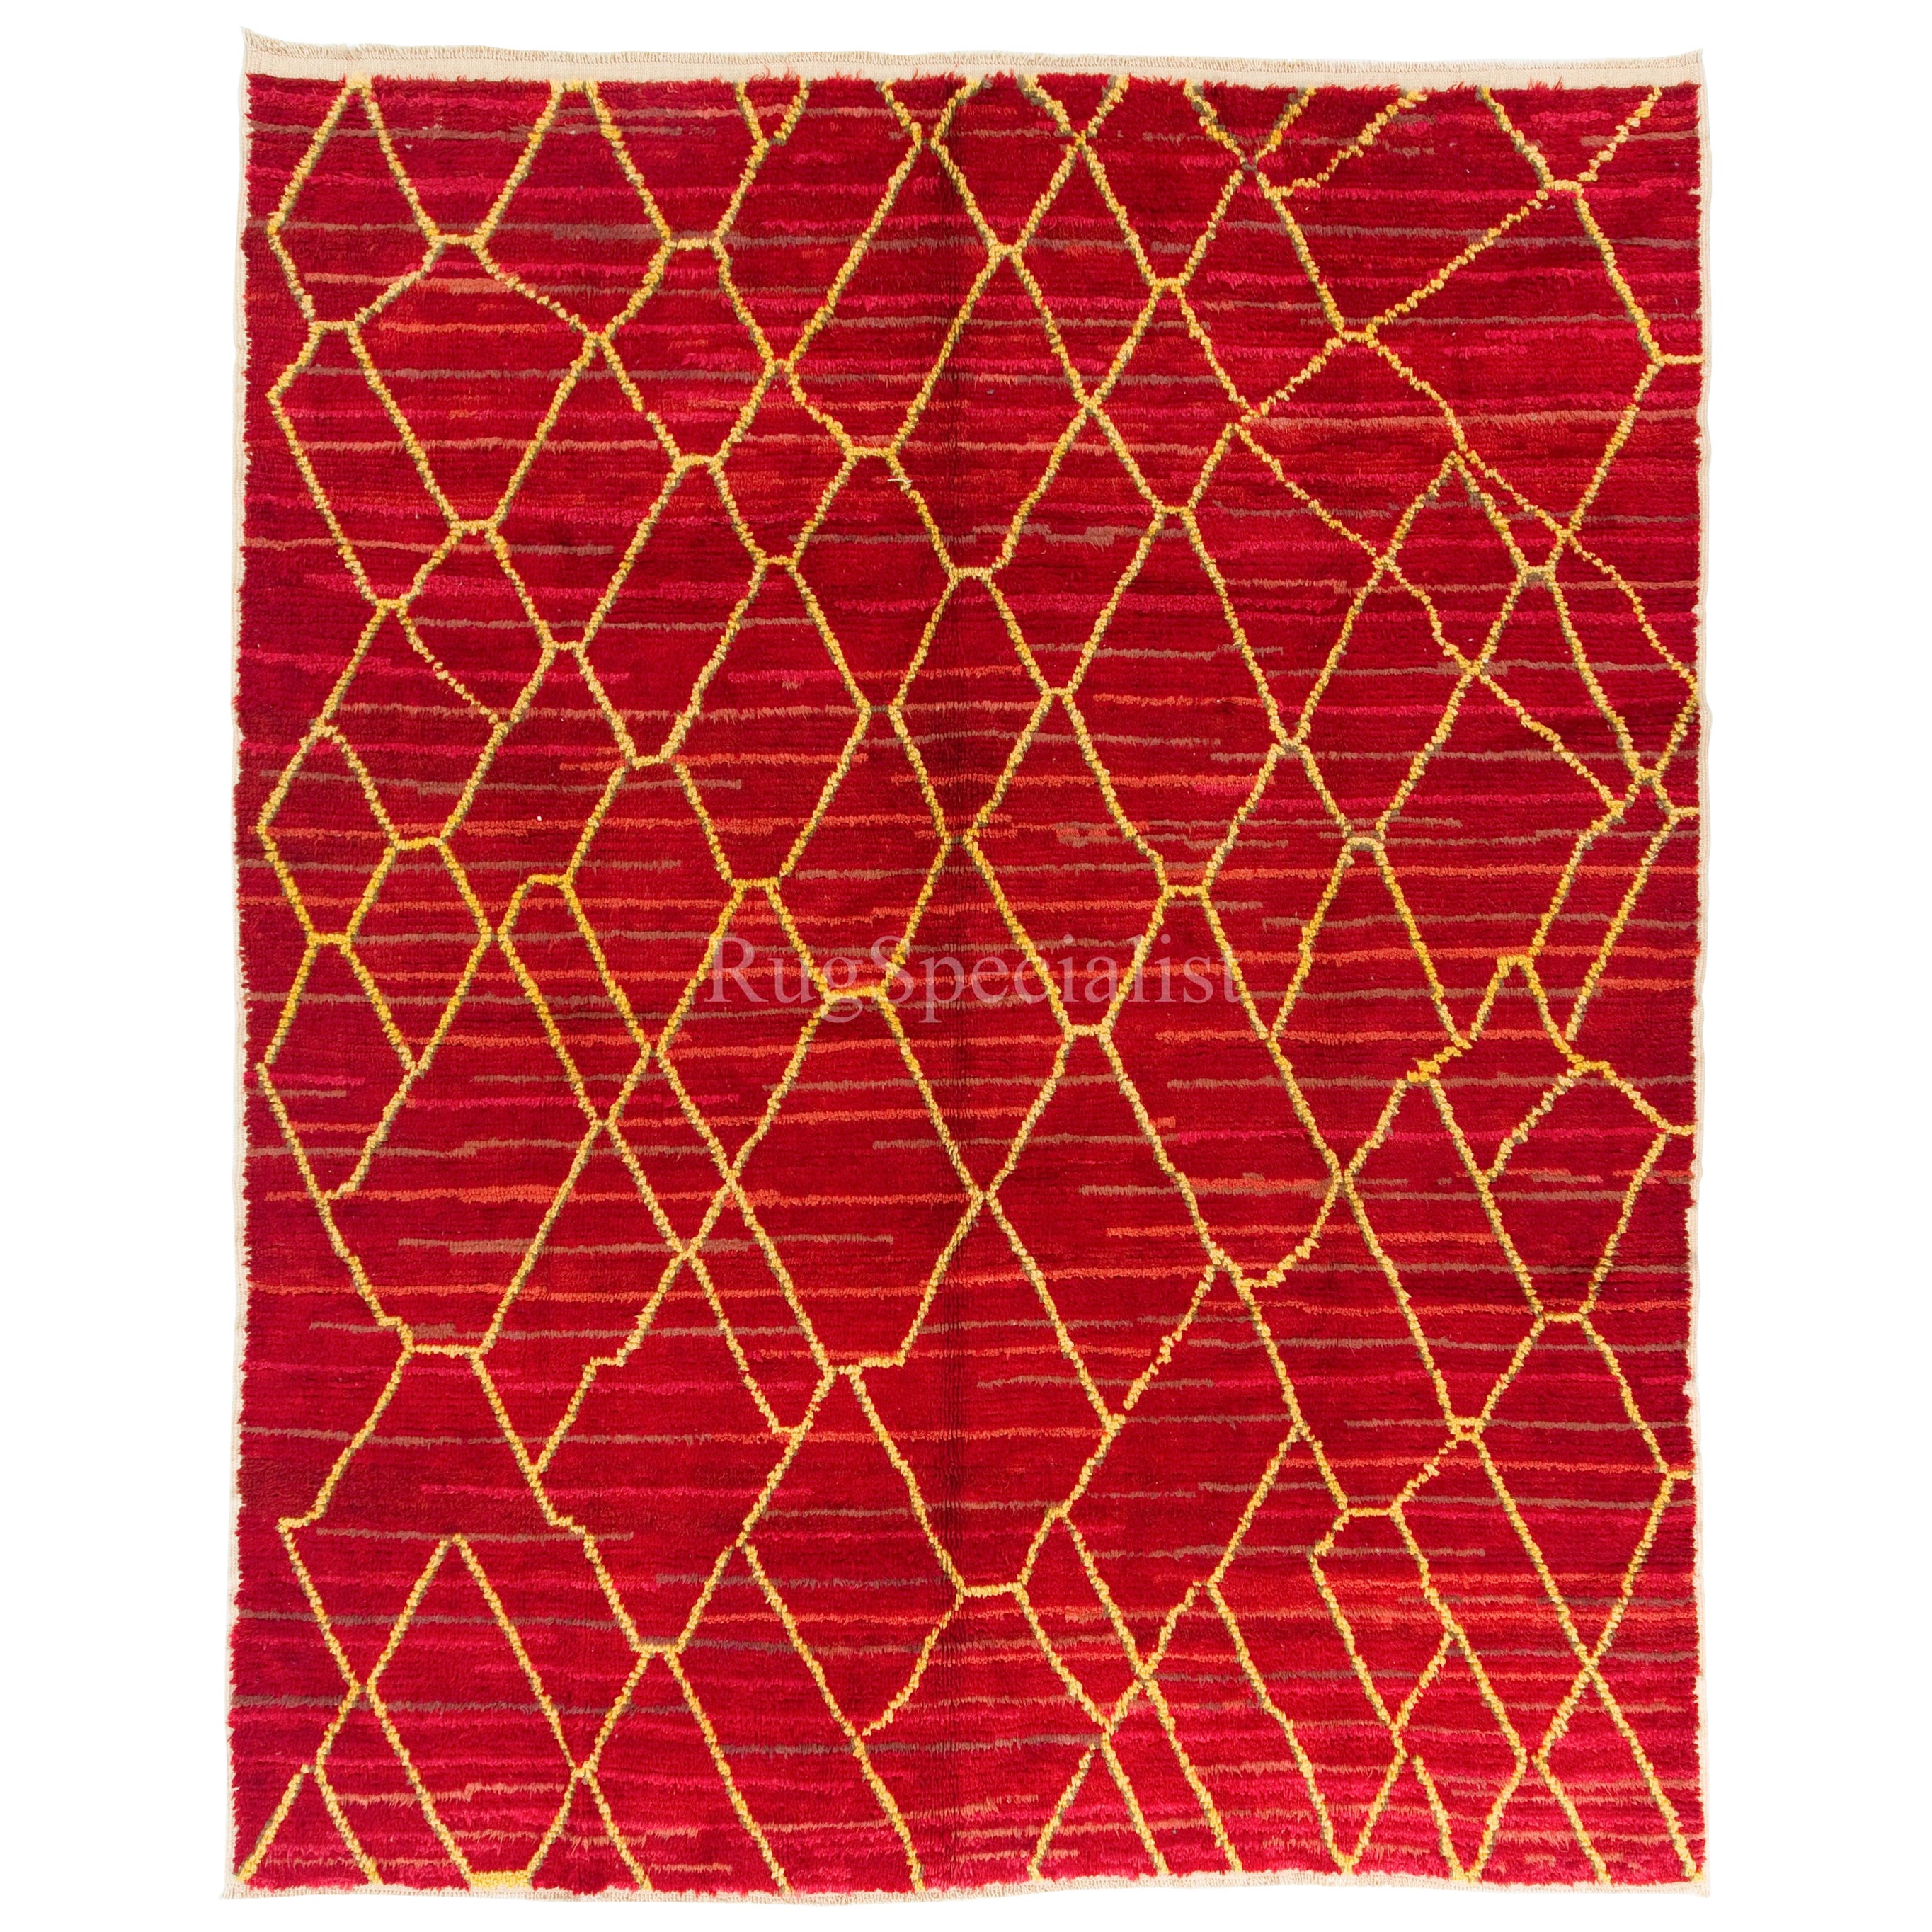 Moroccan Rug with Yellow Atlas Pattern, Red Beni Ourain Tulu Carpet, 100% Wool For Sale